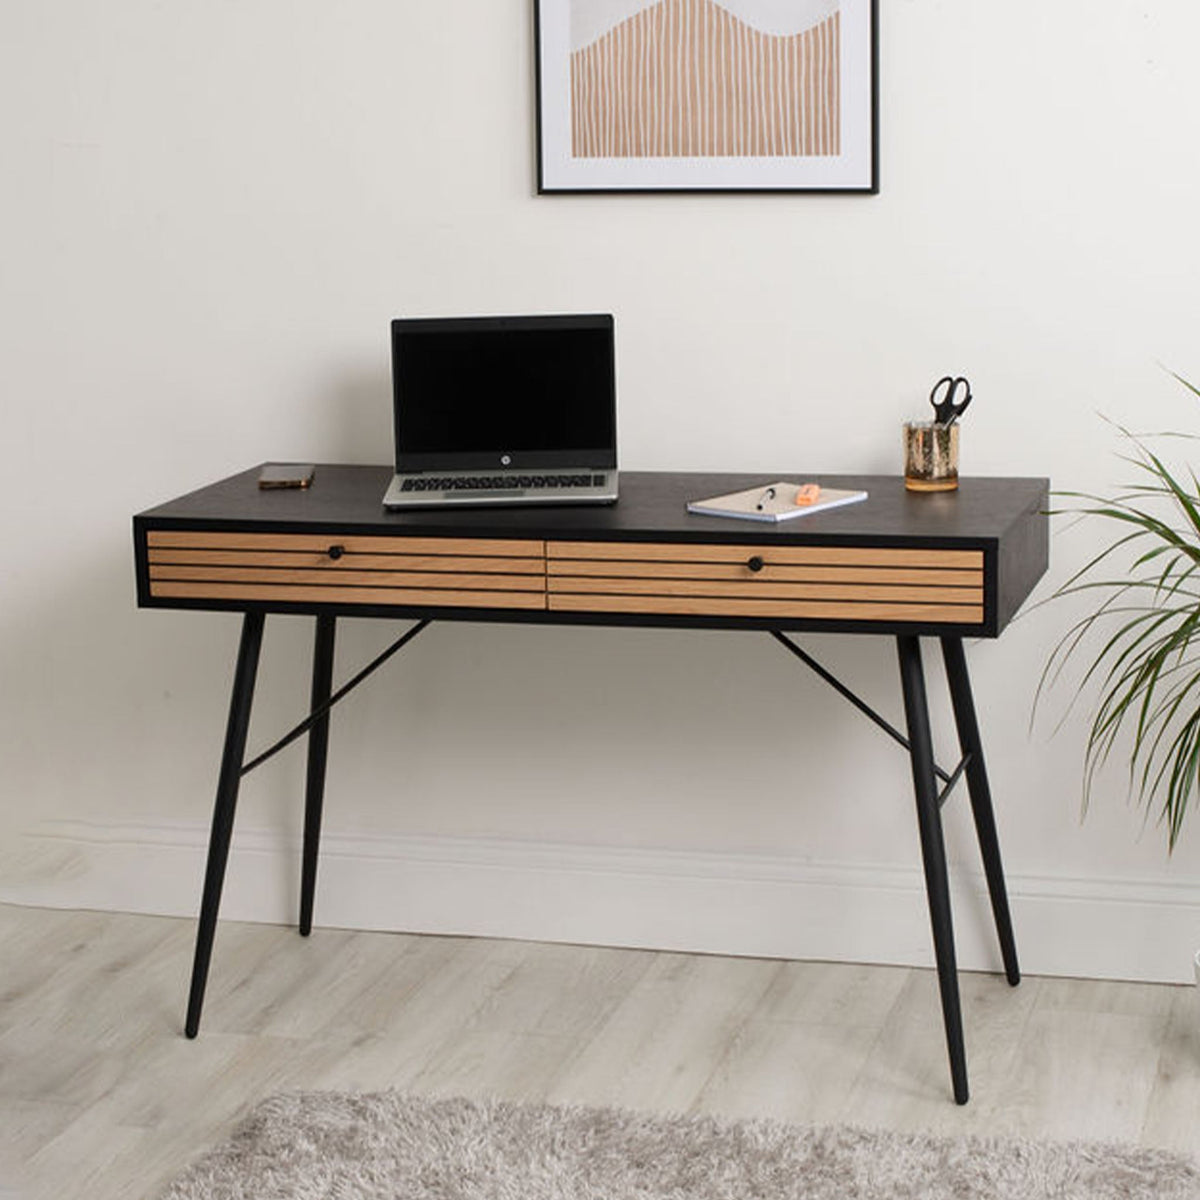 Anders Wireless Smart Office Desk for Work From Home Laptop Computer Lifestyle